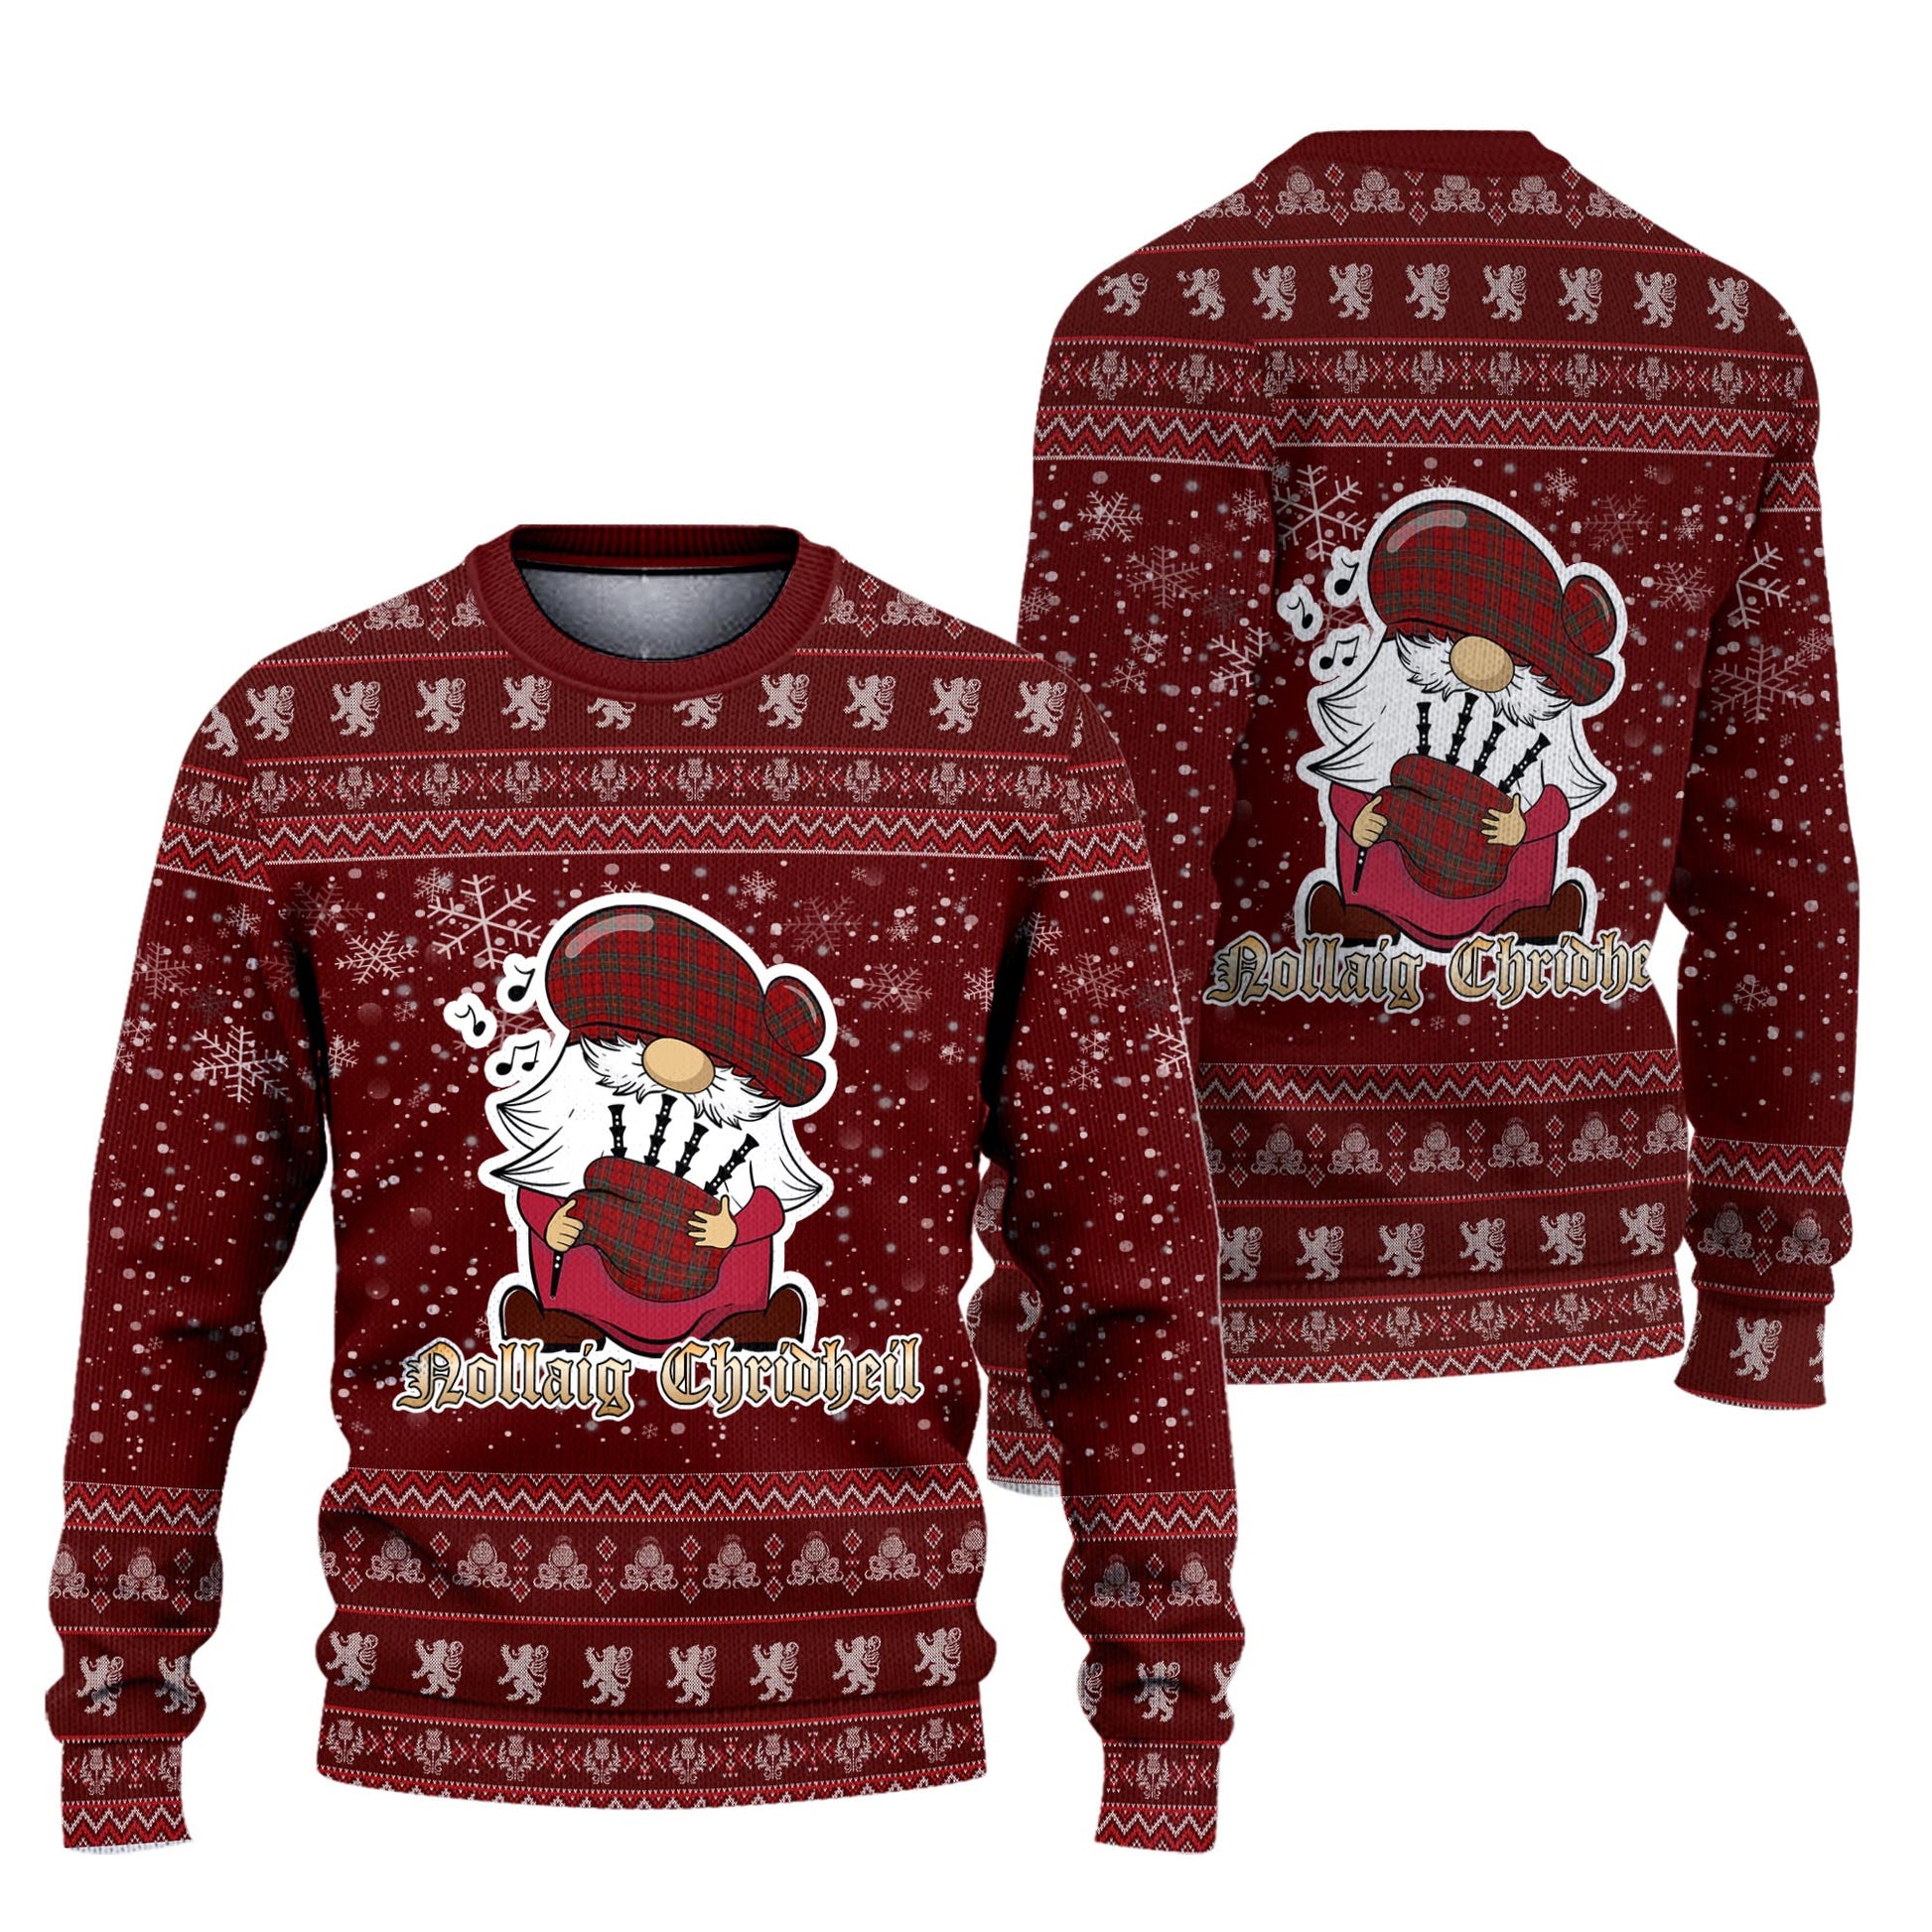 Stewart of Galloway Clan Christmas Family Knitted Sweater with Funny Gnome Playing Bagpipes Unisex Red - Tartanvibesclothing